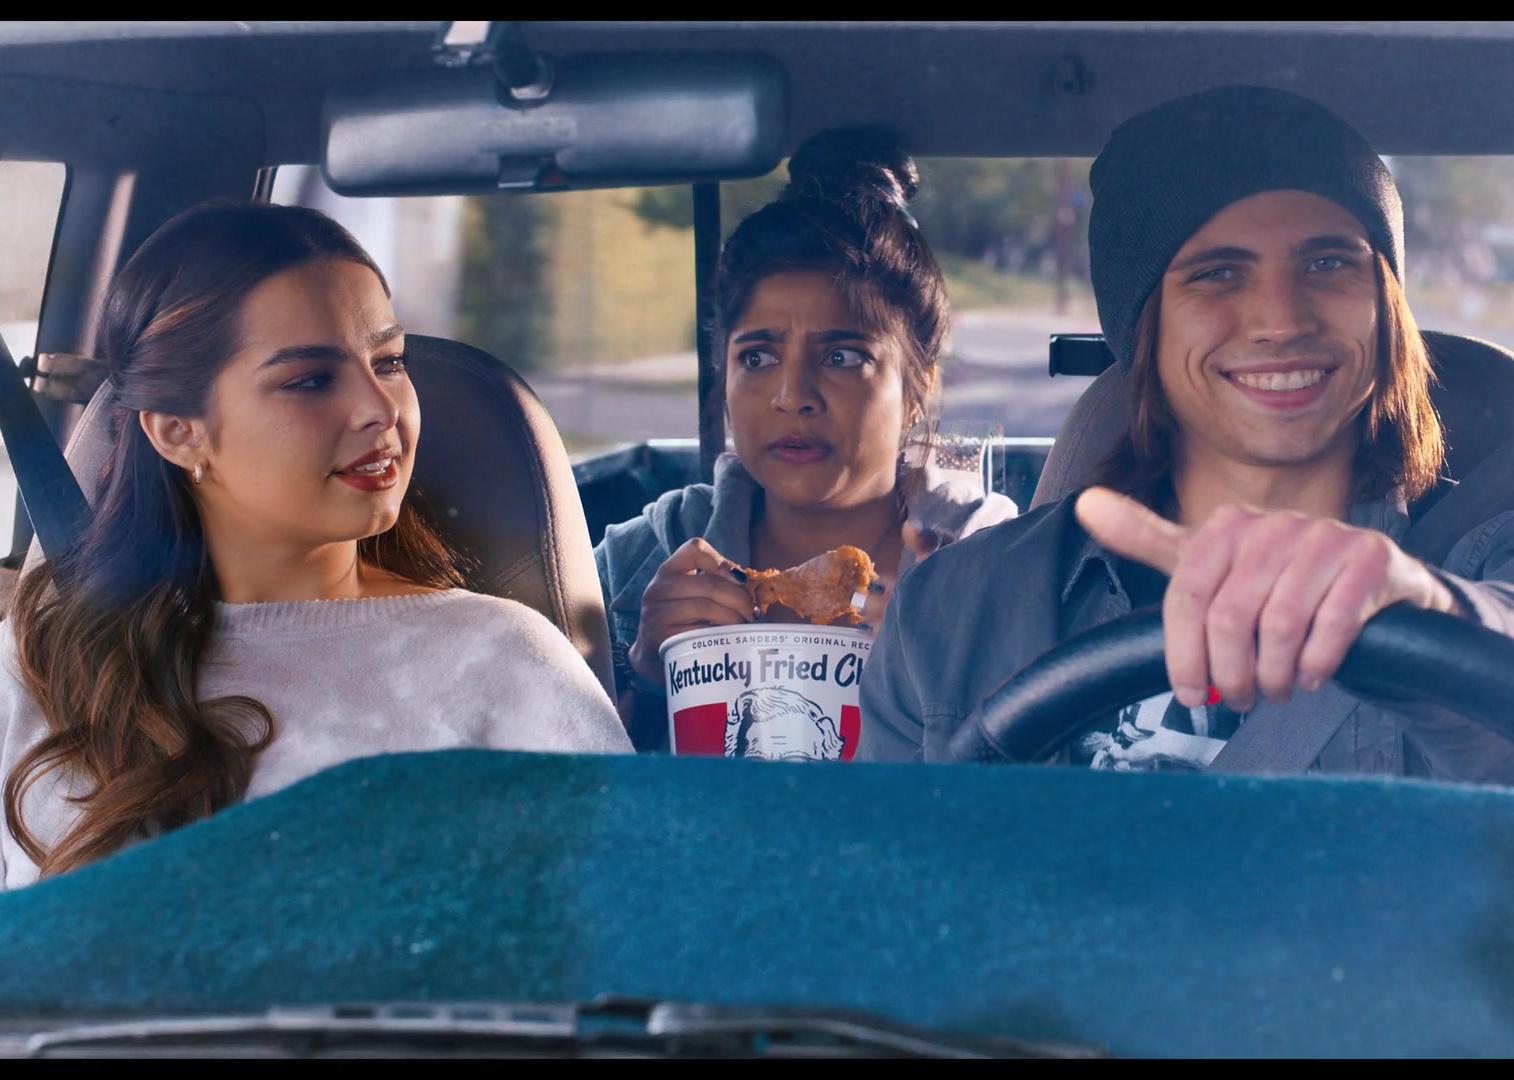 Addison Rae, in the passenger seat of a car, looking at a young man driving and smiling while a young woman in the back seat eats a bucket of fried chicken.